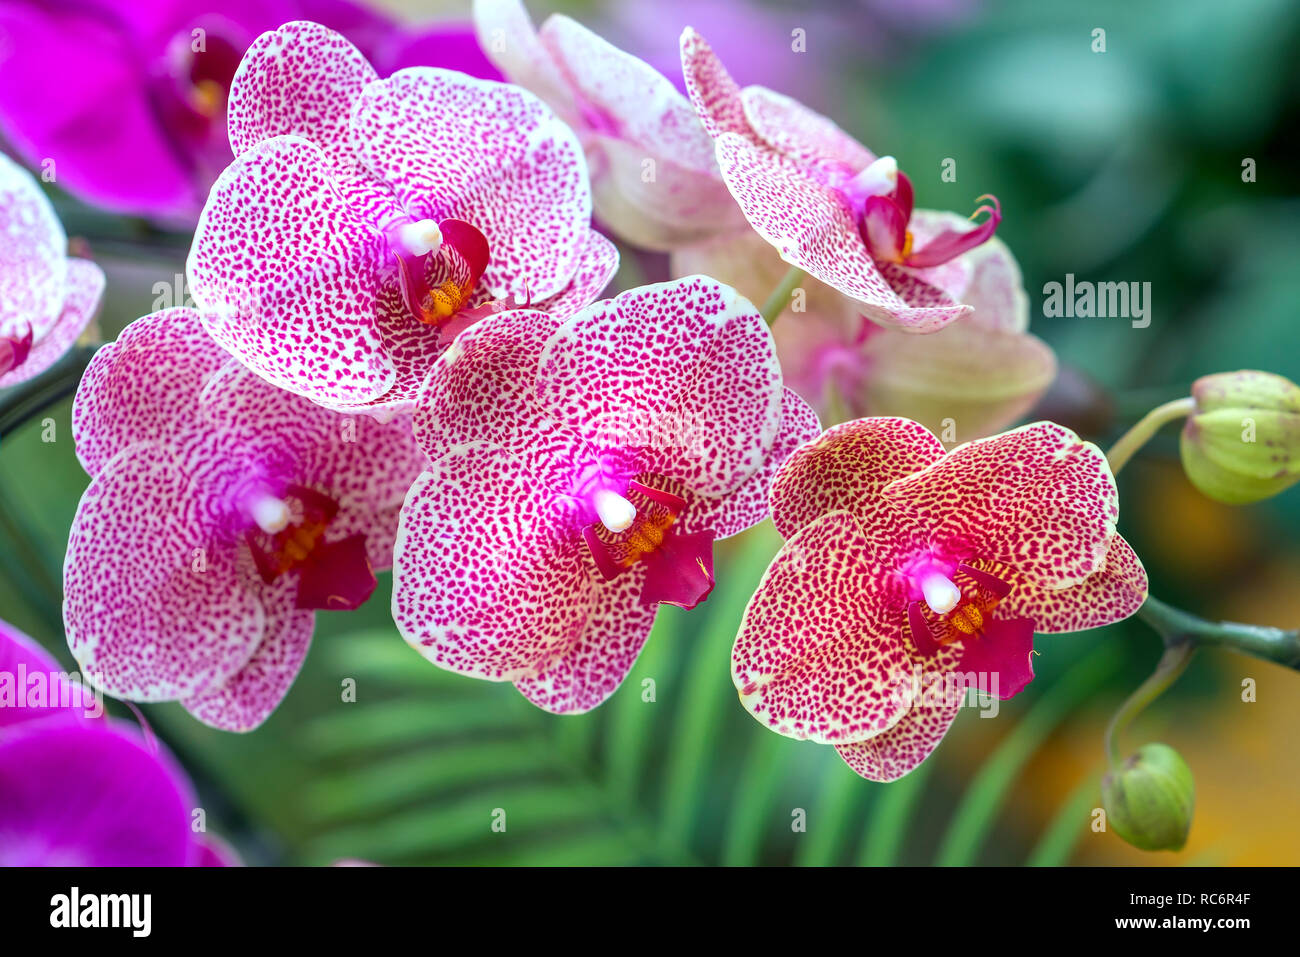 Phalaenopsis orchids flowers bloom in spring adorn the beauty of nature. Stock Photo